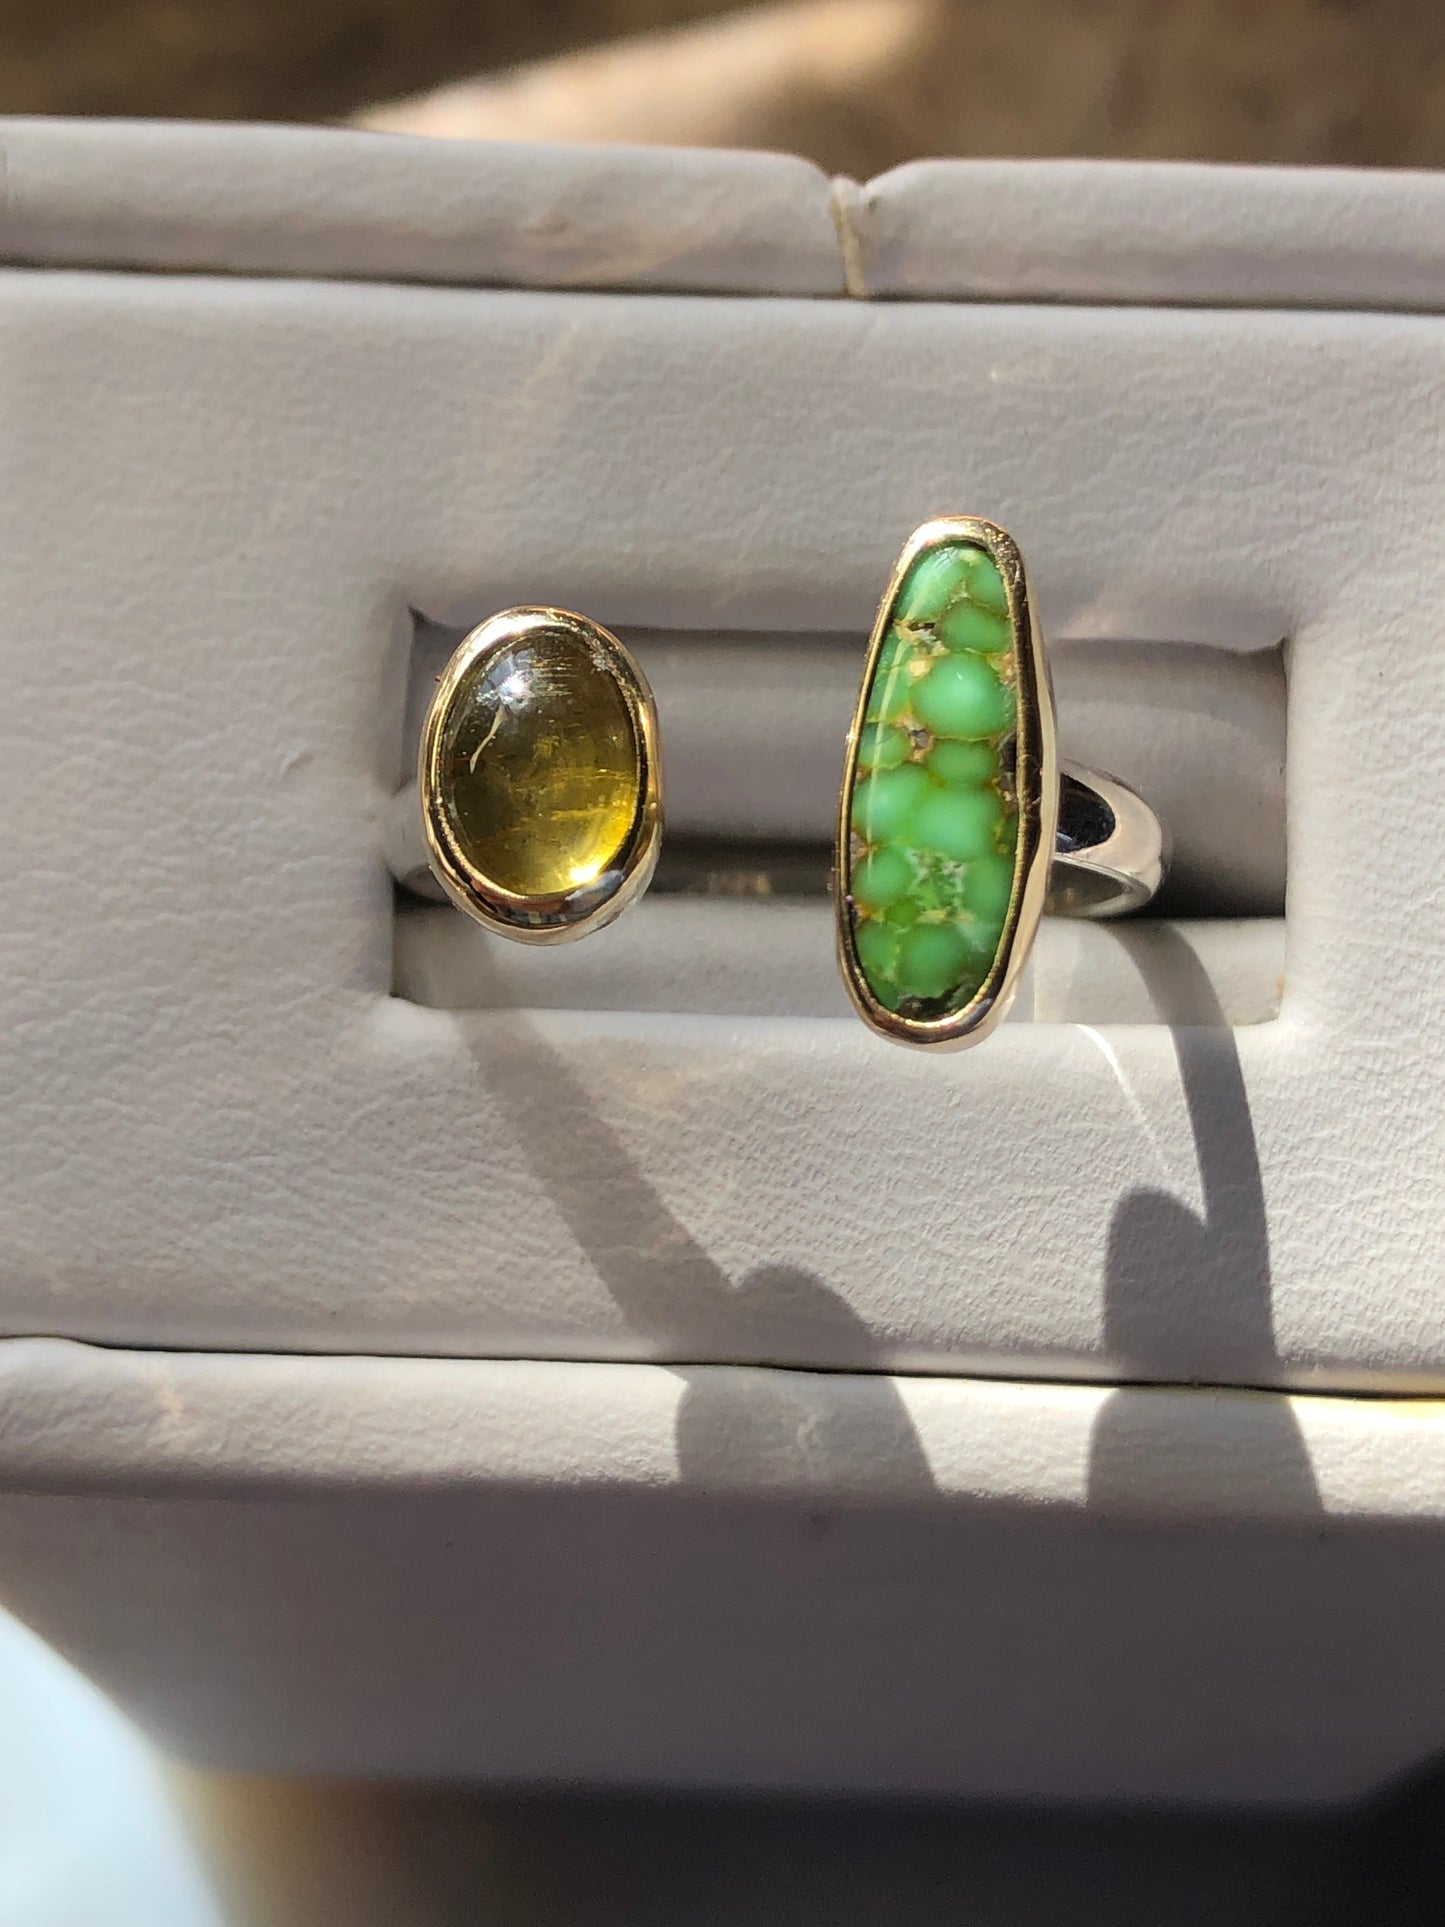 Sonoran Gold Turquoise and Green Tourmaline 14K Bezel Adjustable Ring Median Size 7.5